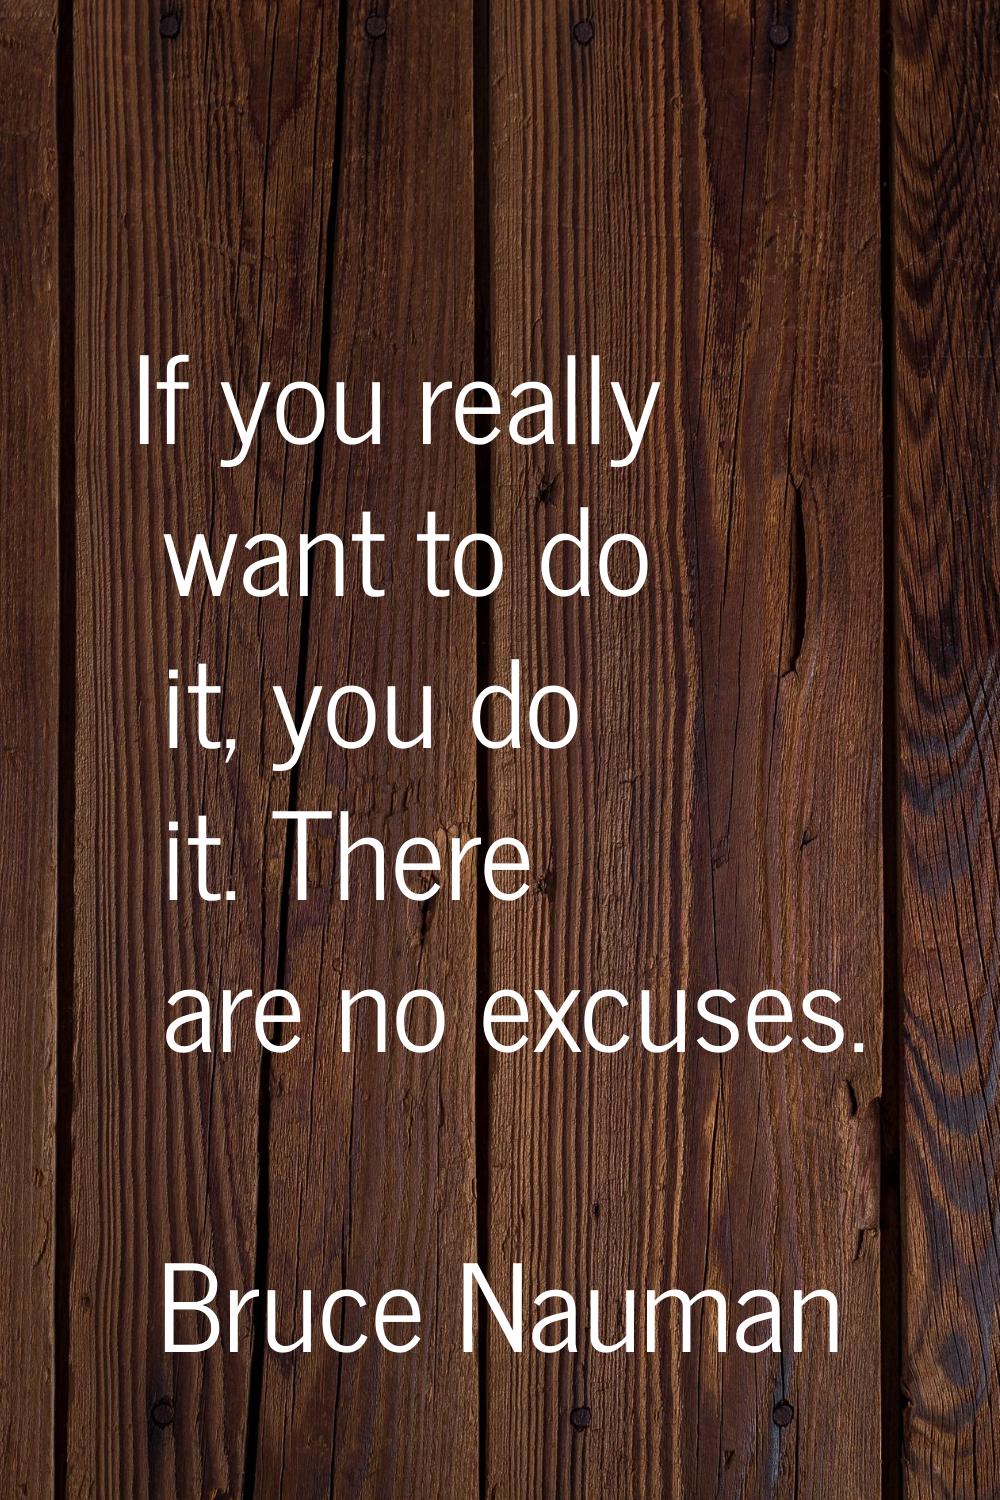 If you really want to do it, you do it. There are no excuses.